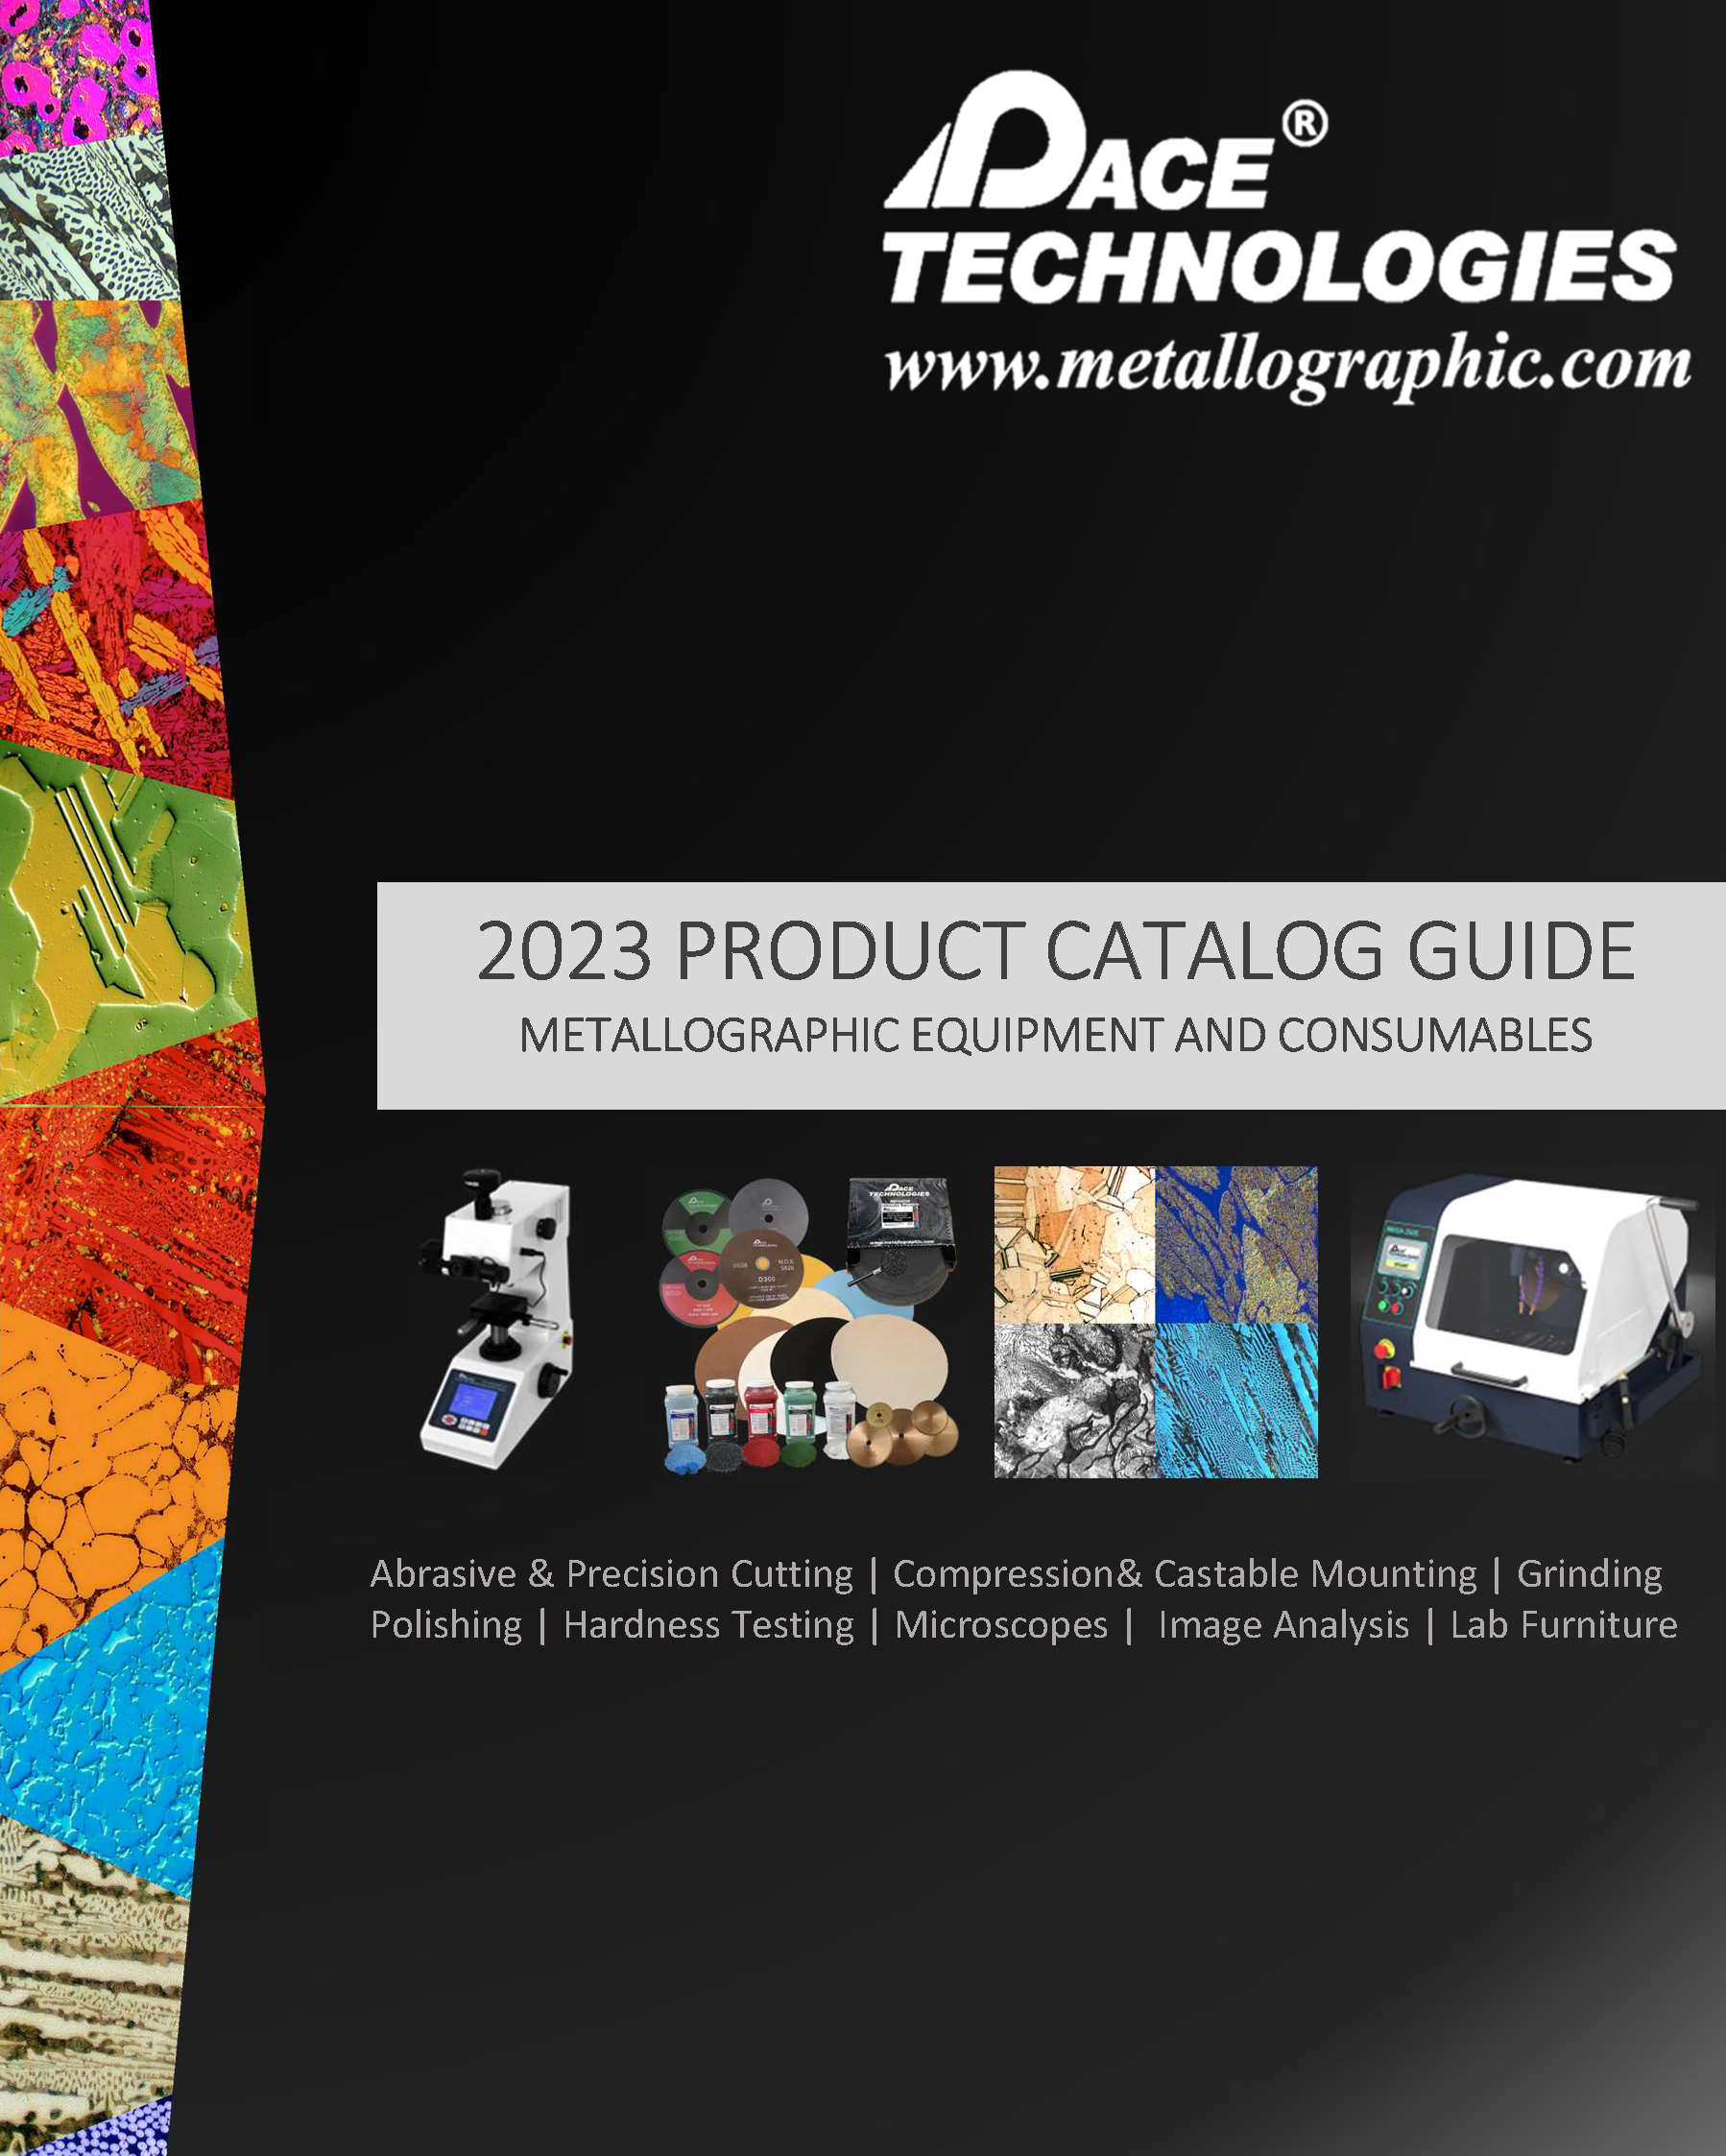 2023 PACE Technologies Metallographic Equipment and Consumables Catalog